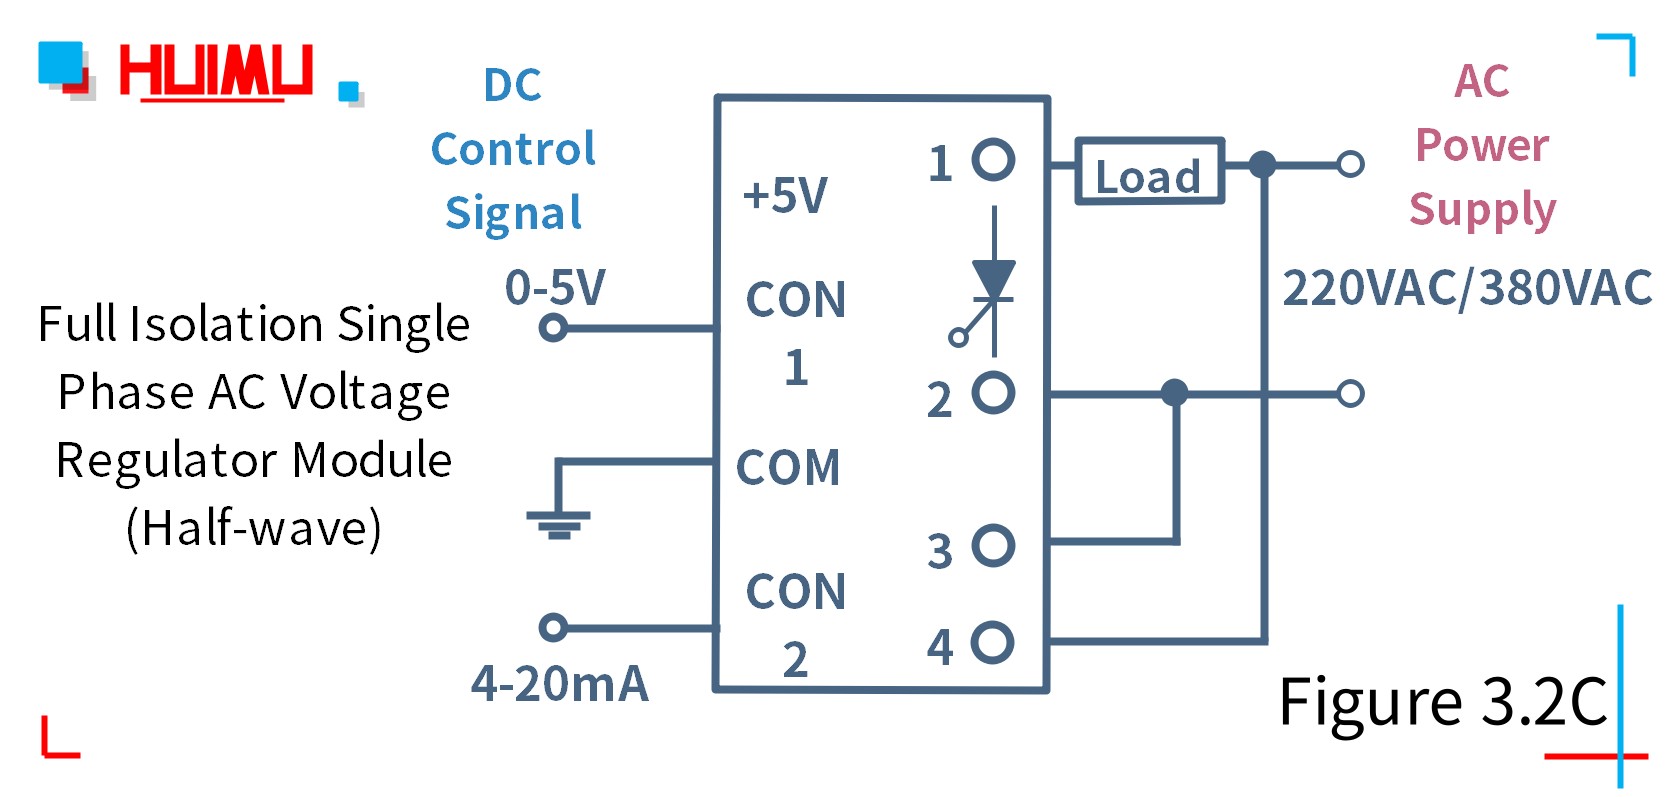 How to wire MGR mager MGR-DTY2240EG full isolation single phase AC voltage regulator? Half-wave type AC voltage regulator module circuit diagram, rated working voltage is 220VAC or 380VAC, output waveform is half wave. More detail via www.@huimultd.com